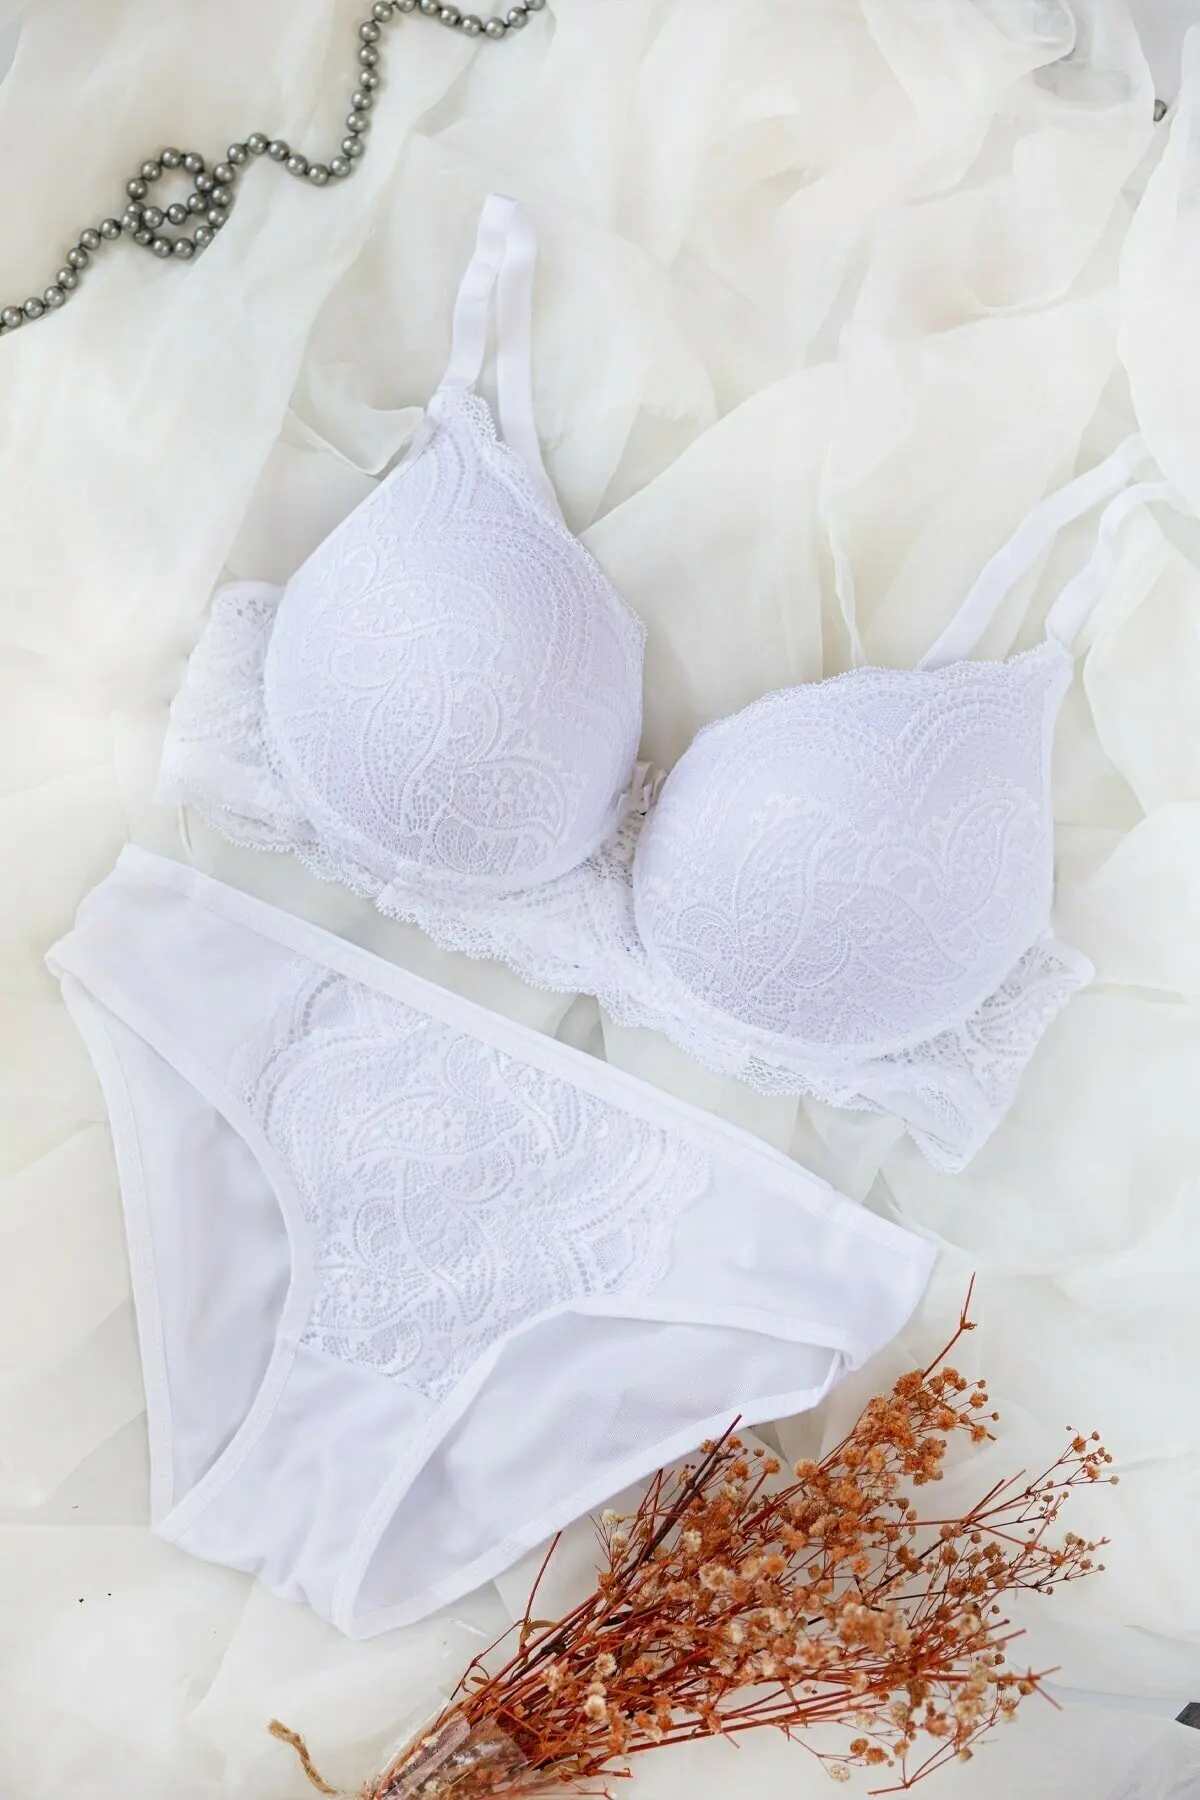 LOOK FOR YOUR WONDERFUL NIGHTS WITH ITS STUNNING COLOR Women's White Filled Lace Bra And Panty Set   FREE SHIPPING